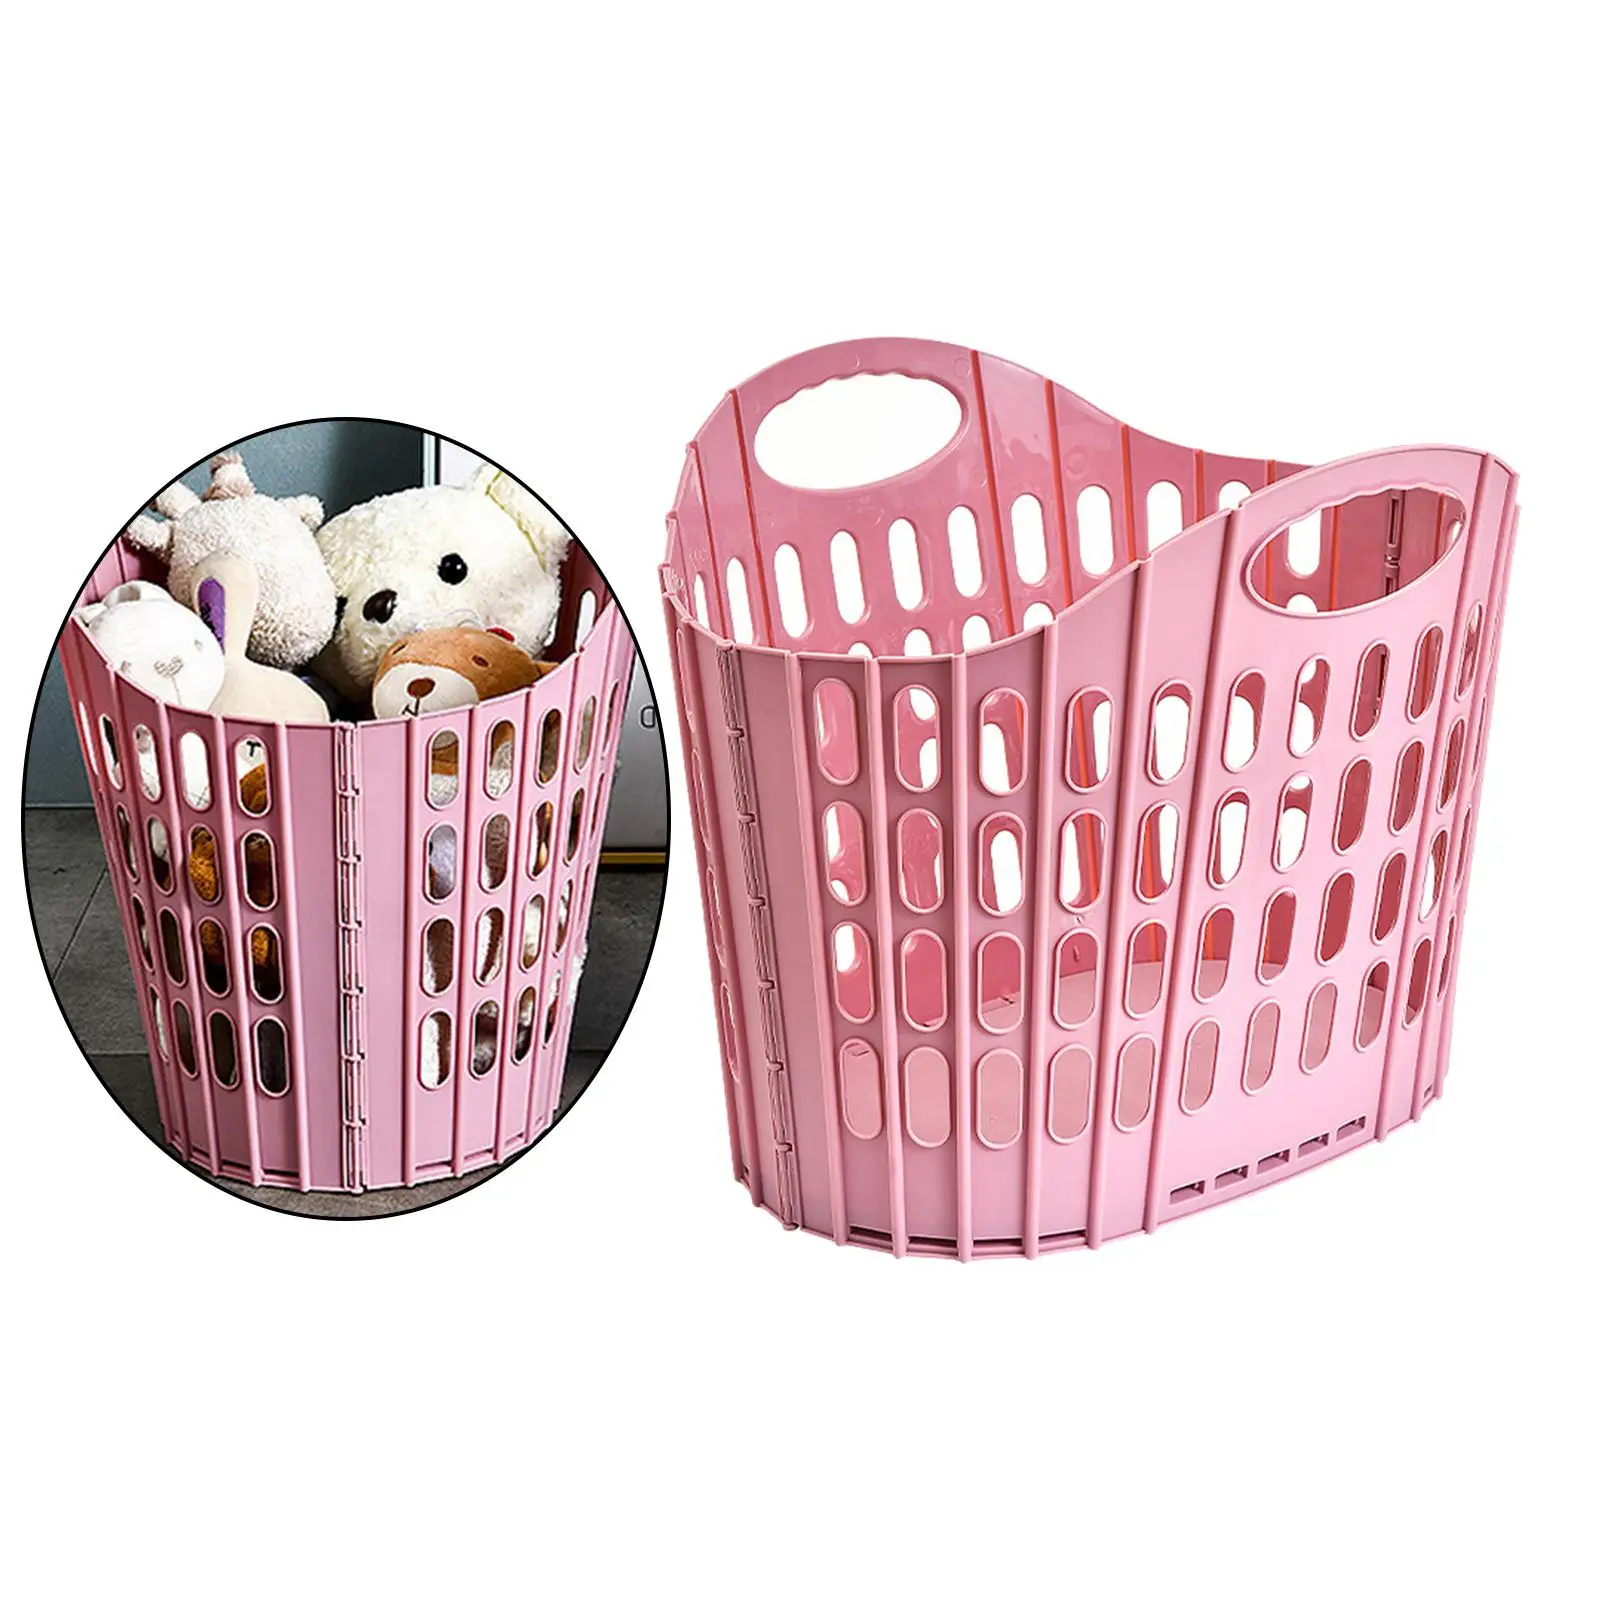 Collapsible Laundry Basket Laundry Hamper with Handles Durable for Dirty Clothes Towels Blankets Bedroom Bathroom Punch-Free